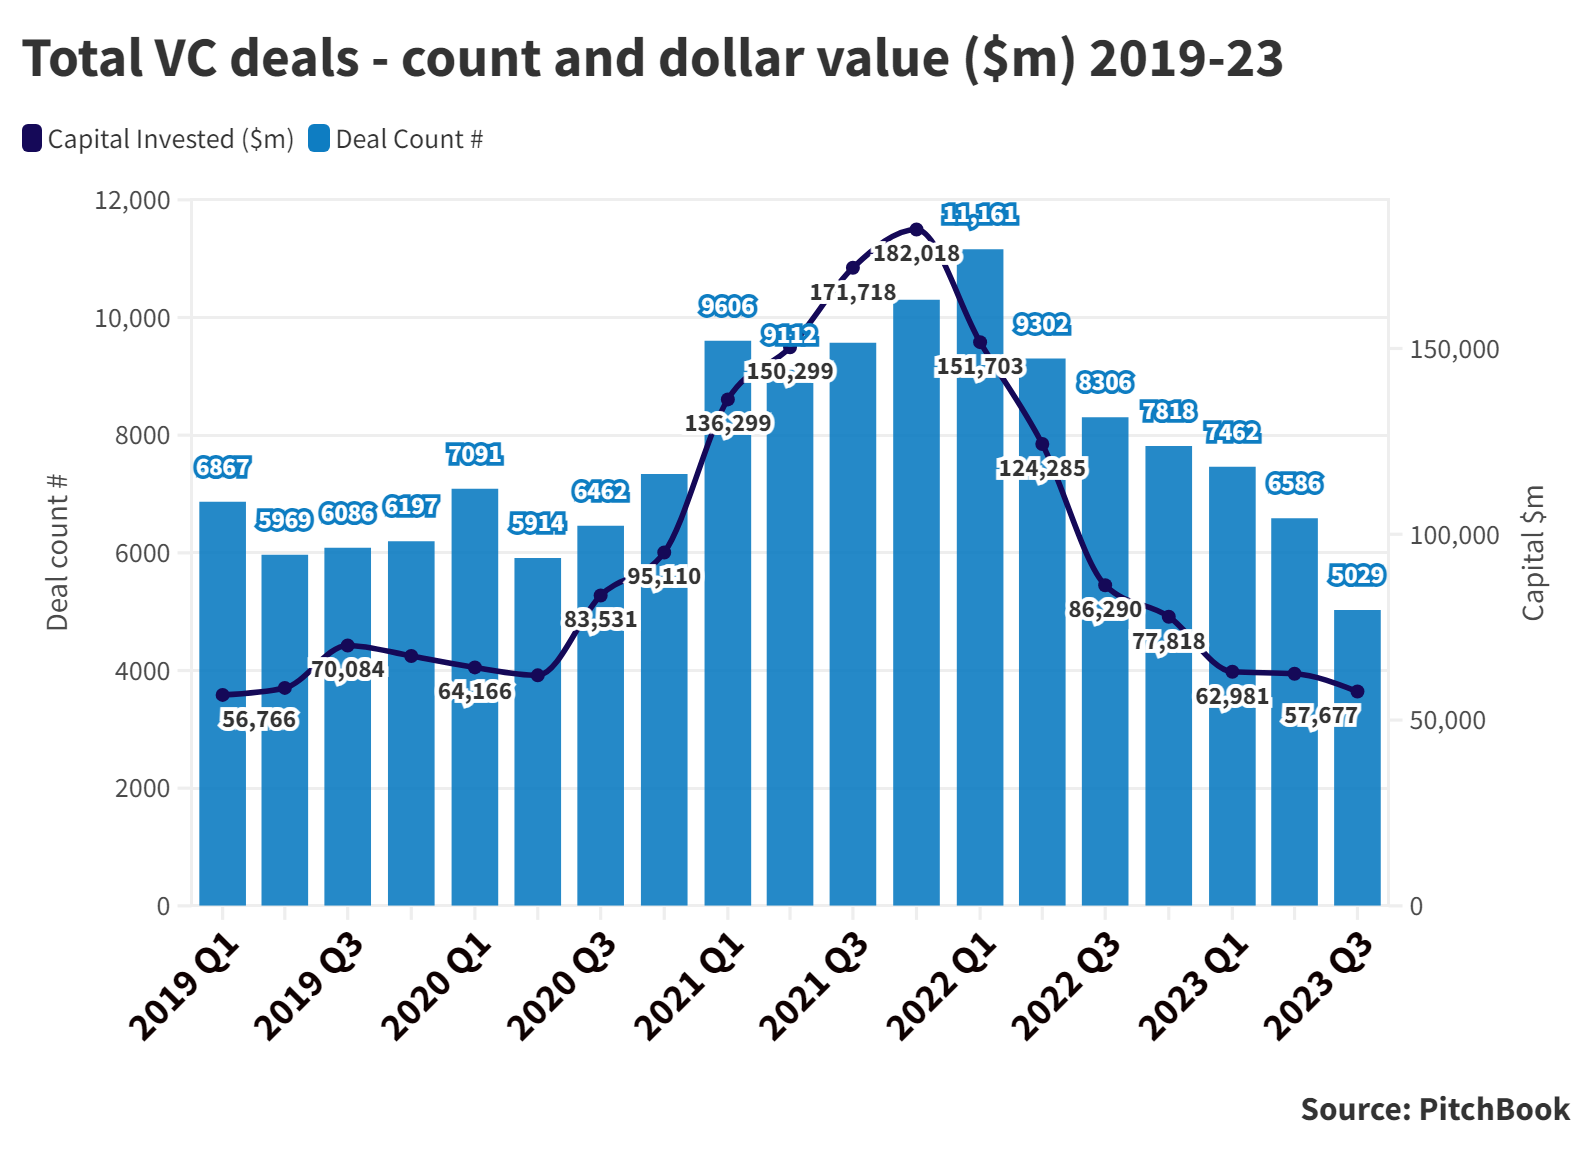 Bar chart showing total VC deal count and dollar value ($m) on quarterly basis 2019-23. Source: PitchBook